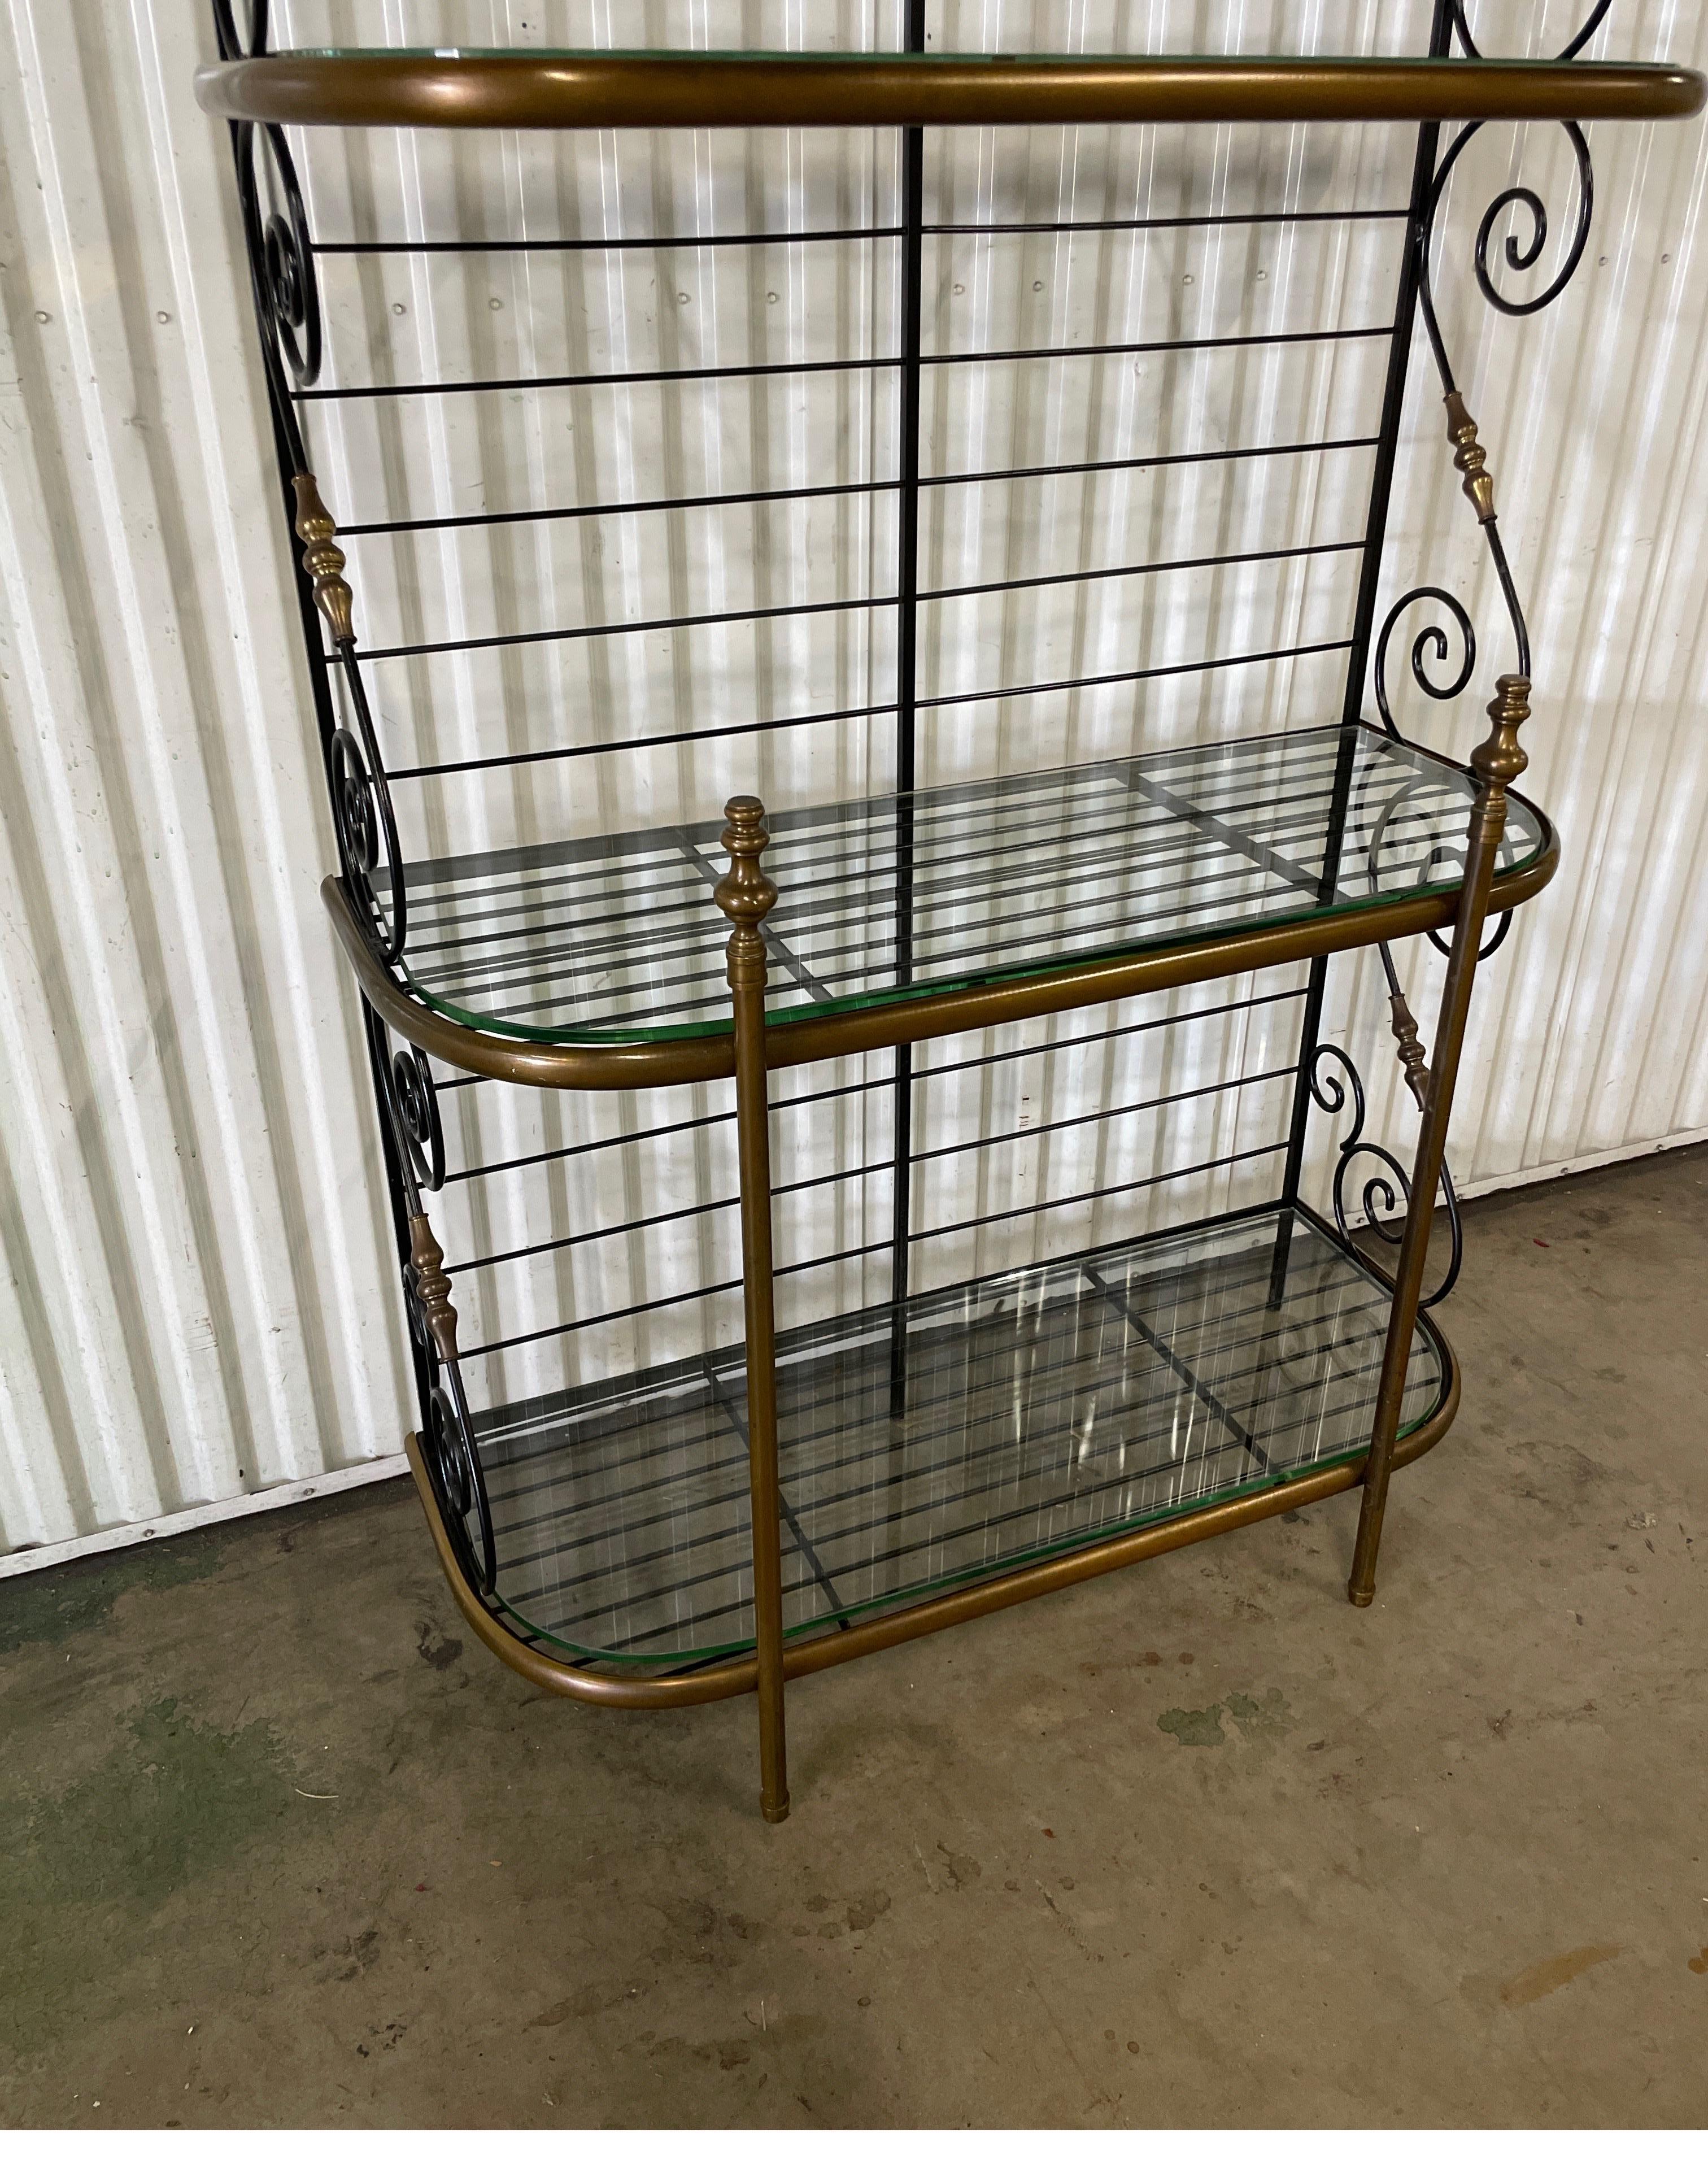 Vintage wrought iron and brass three shelf French Baker's Rack. Glass was a later addition to the shelves. Scrolled details on side & top. Very nice condition with patinated brass trim.